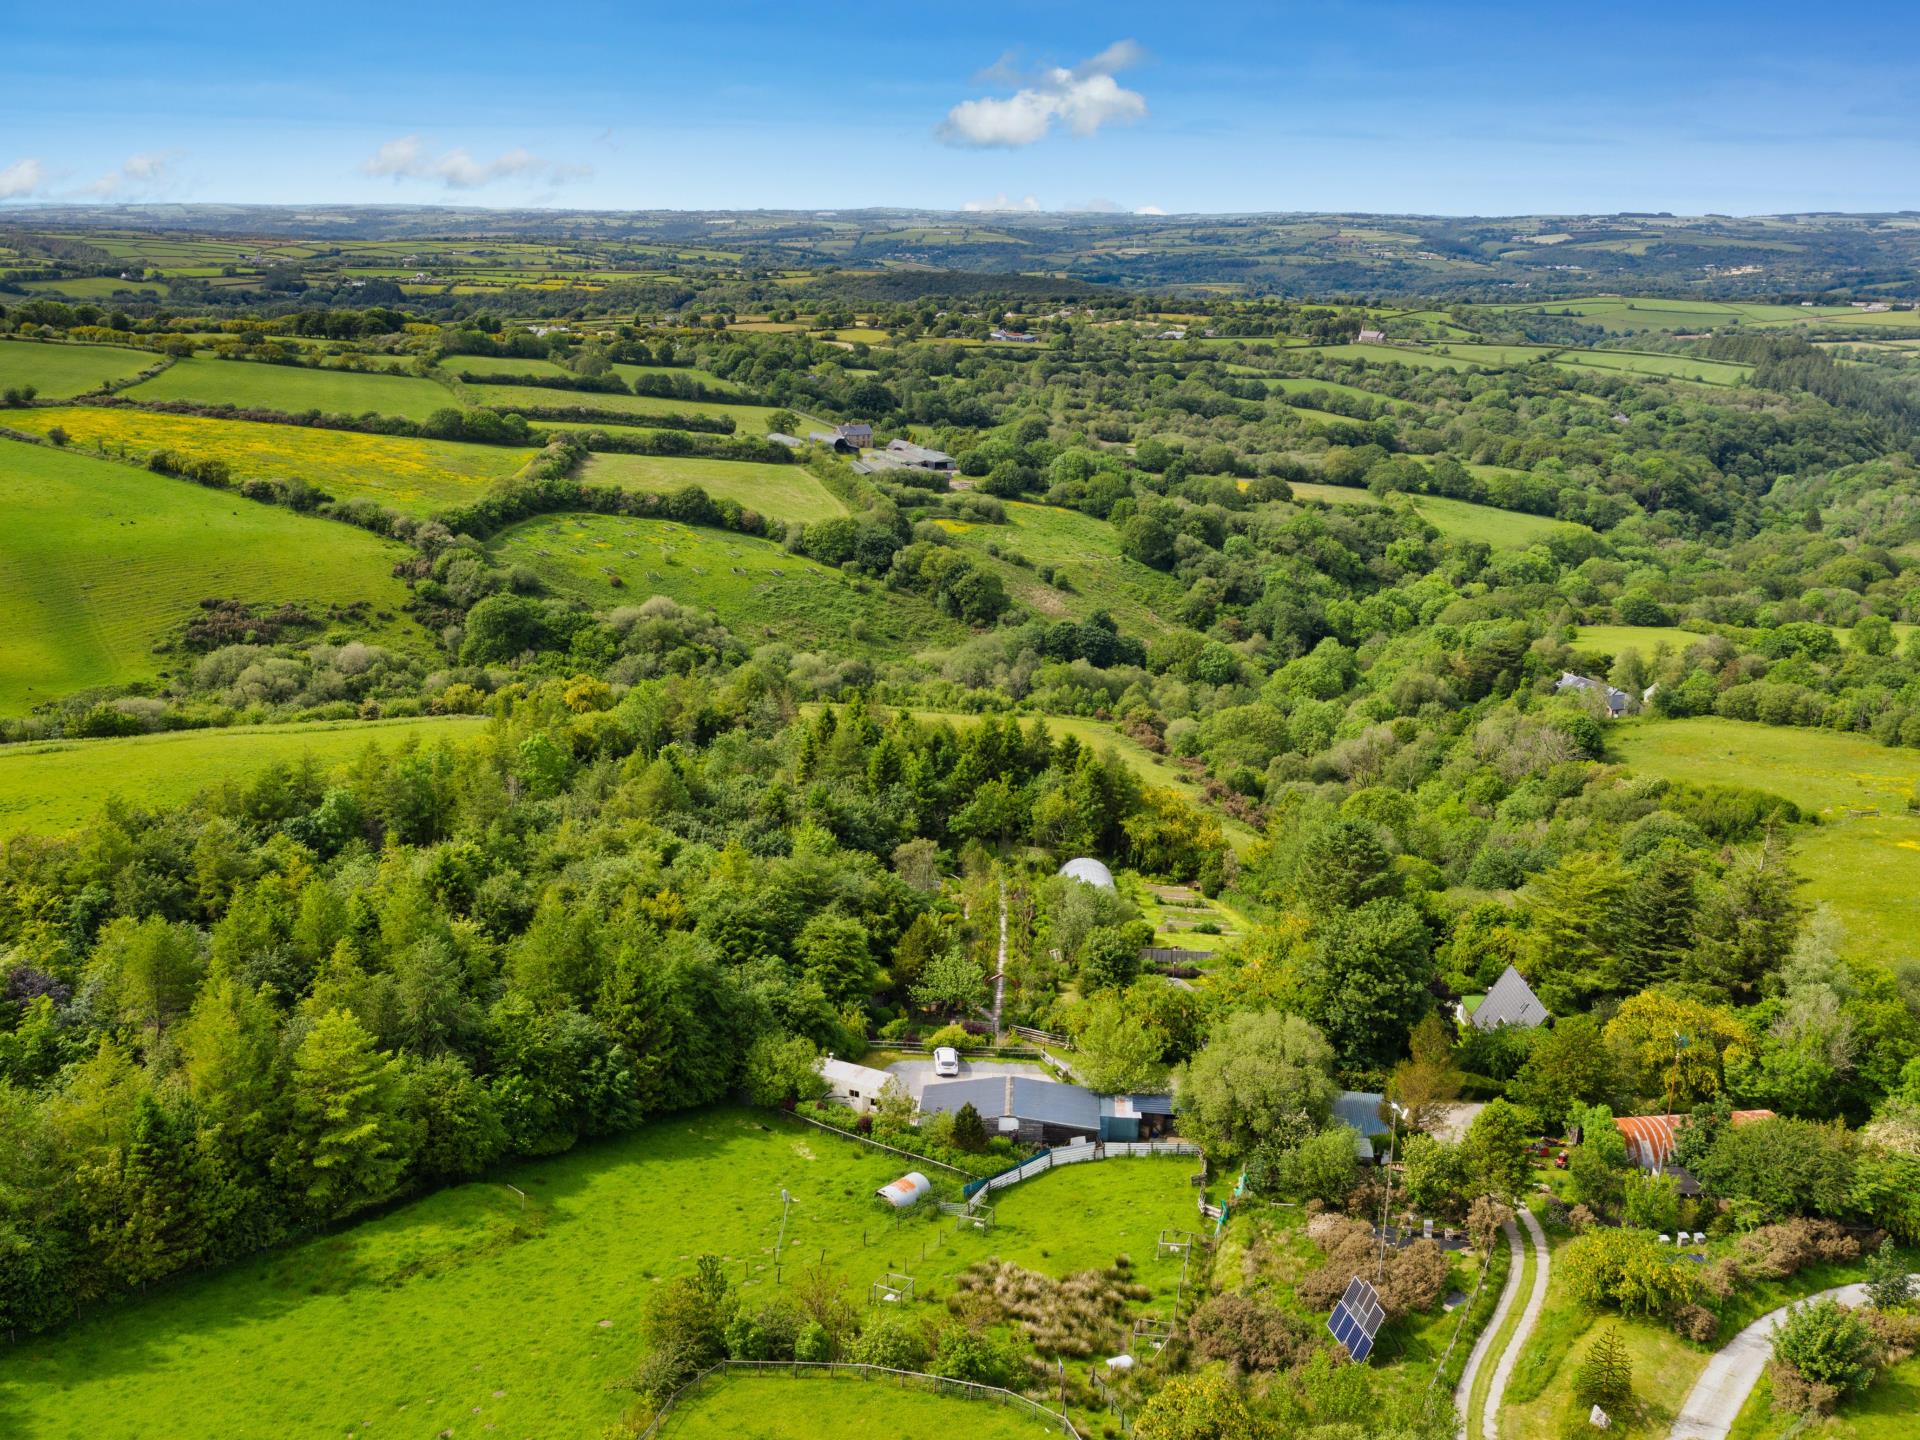 Breathtaking views over the Teifi Valley